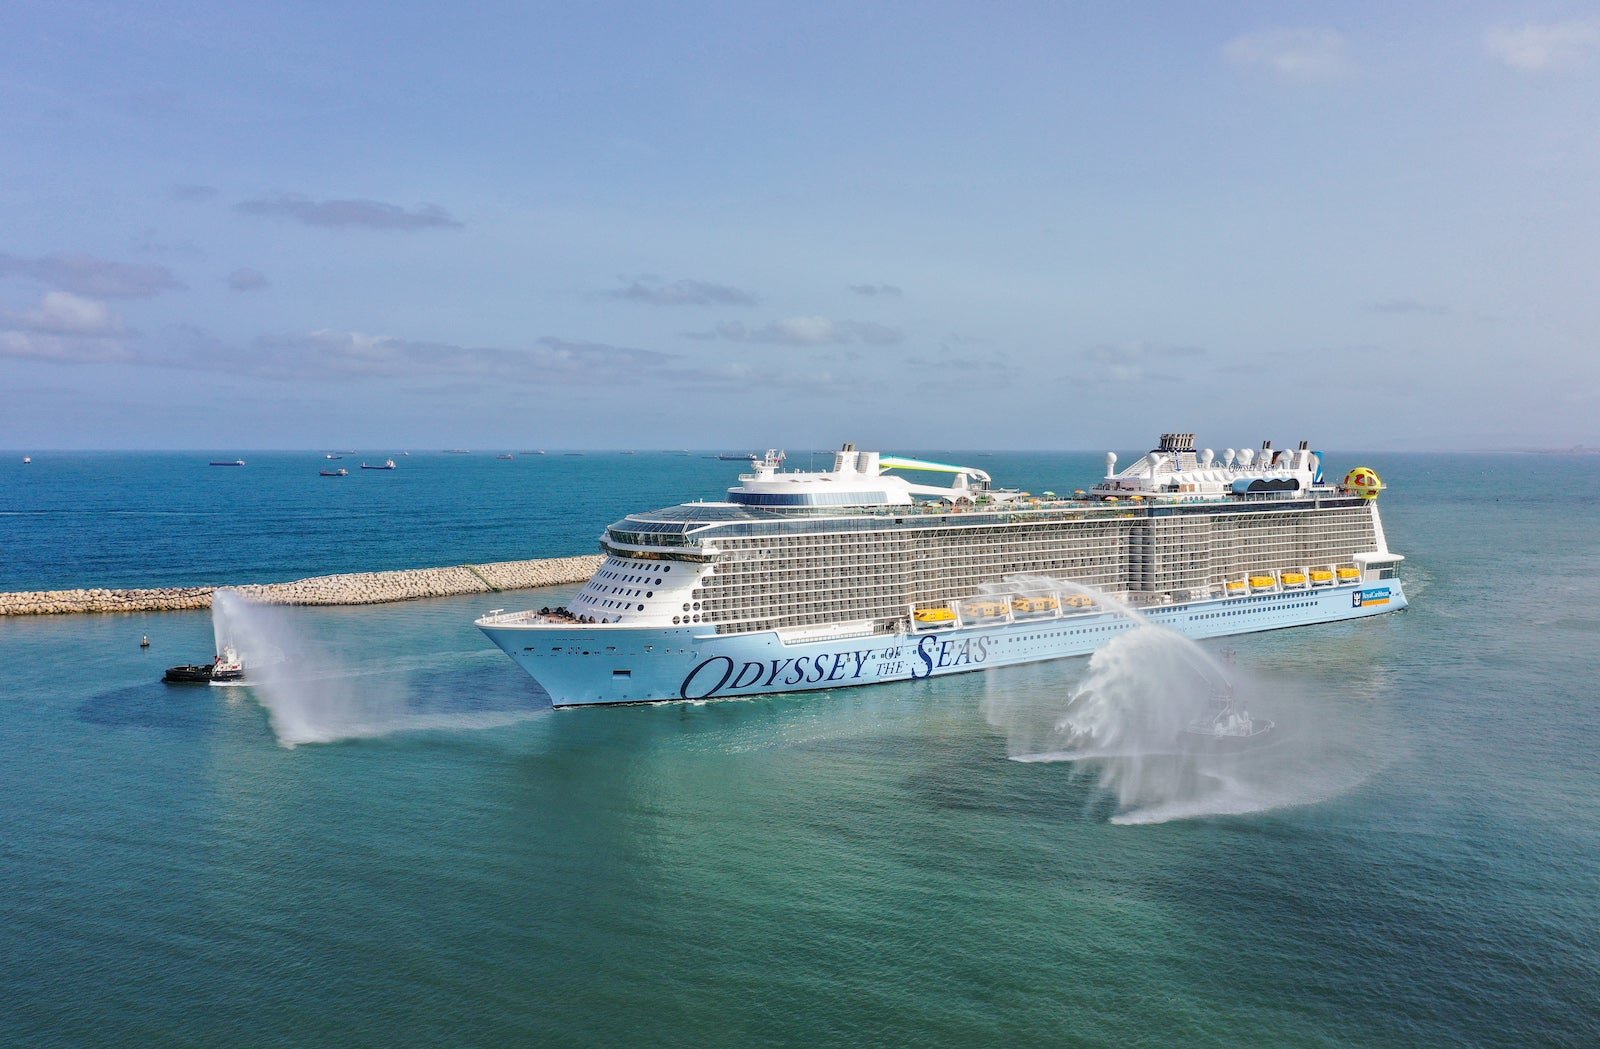 Cruise line CEOs: Challenges for industry remain, but 'future is bright' for cruising